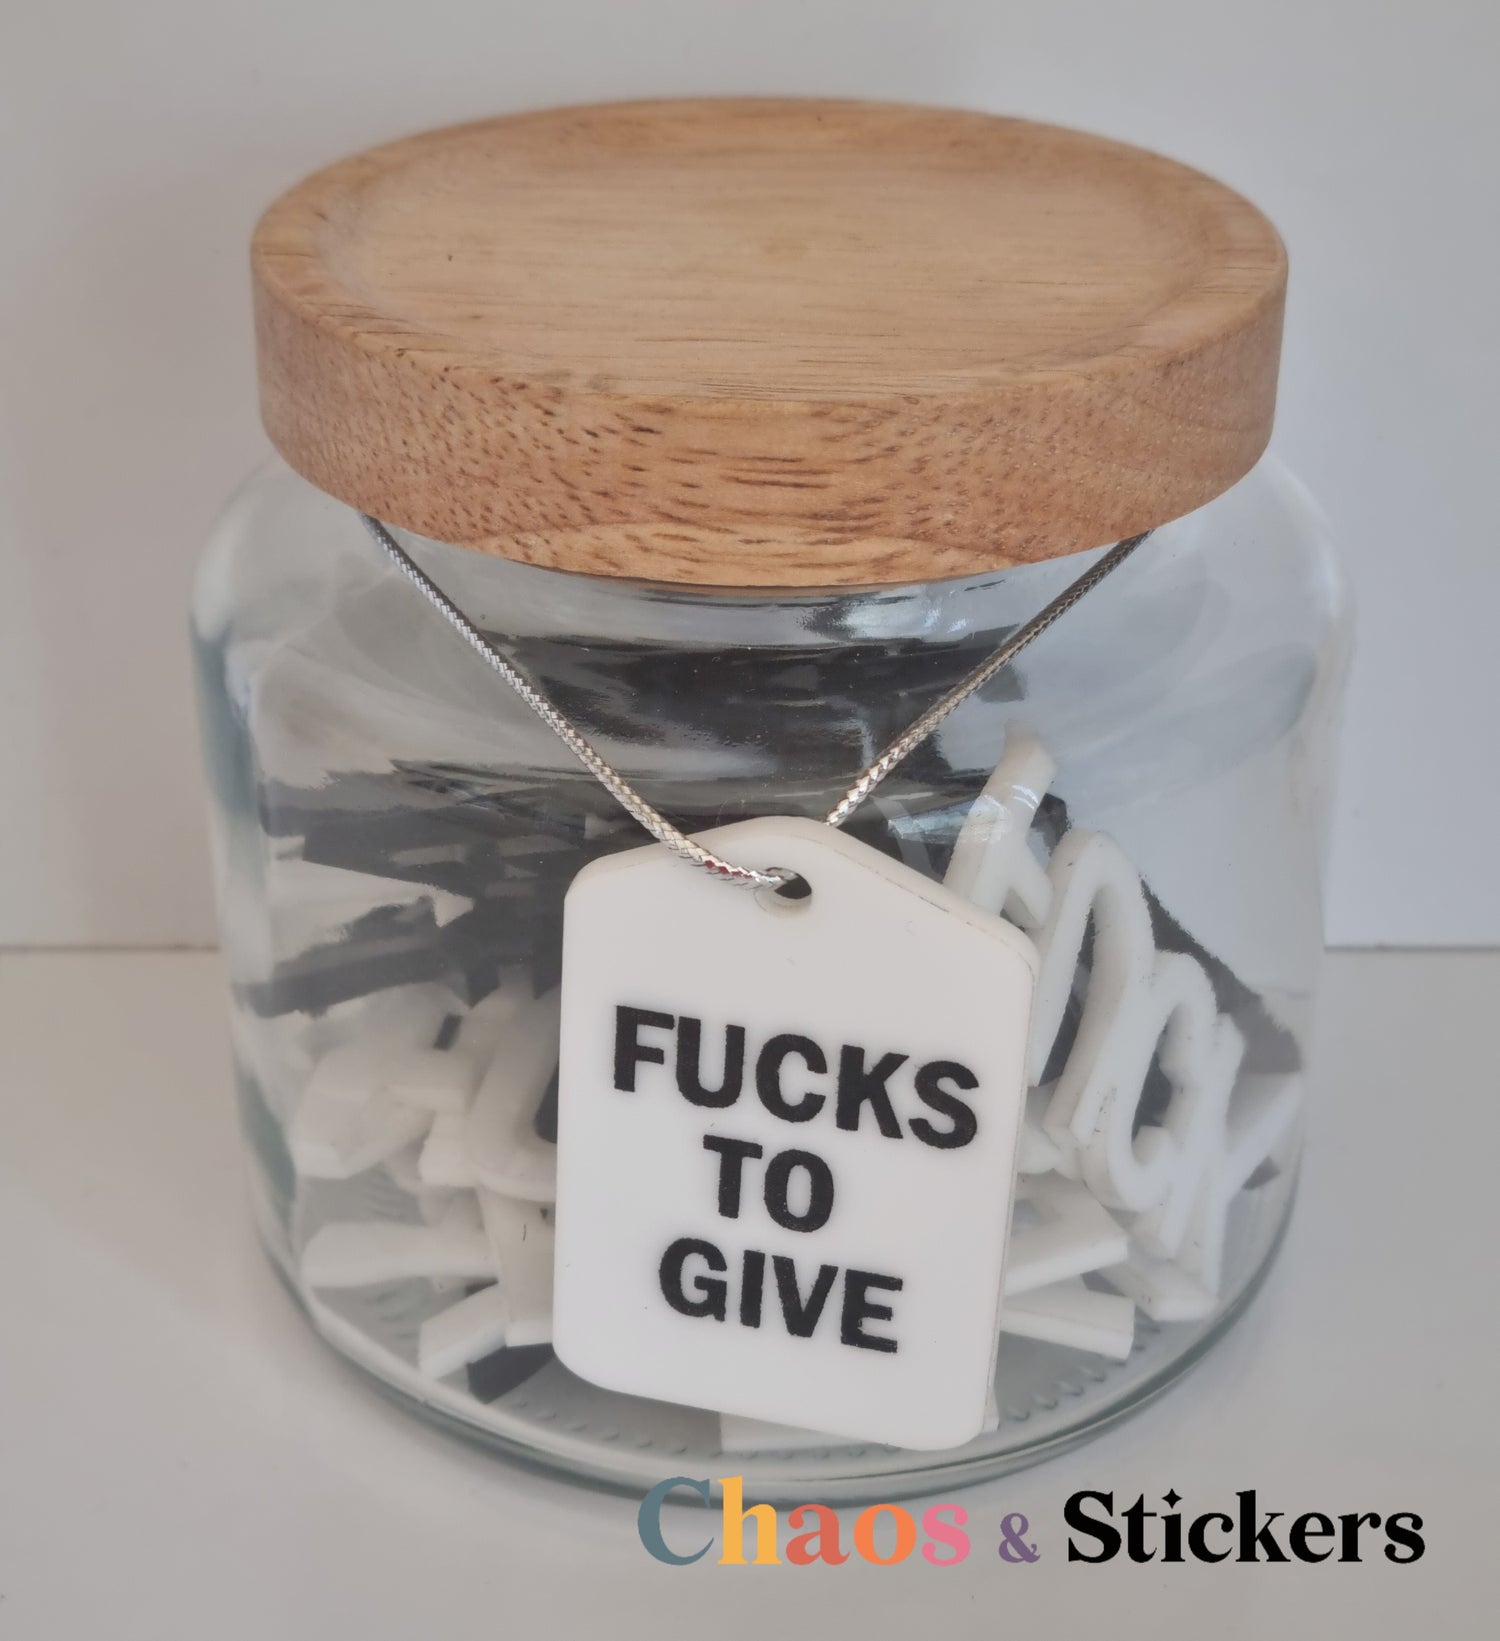  Not Giving a Fuck, Jar of Fucks Gift Fucks to Give